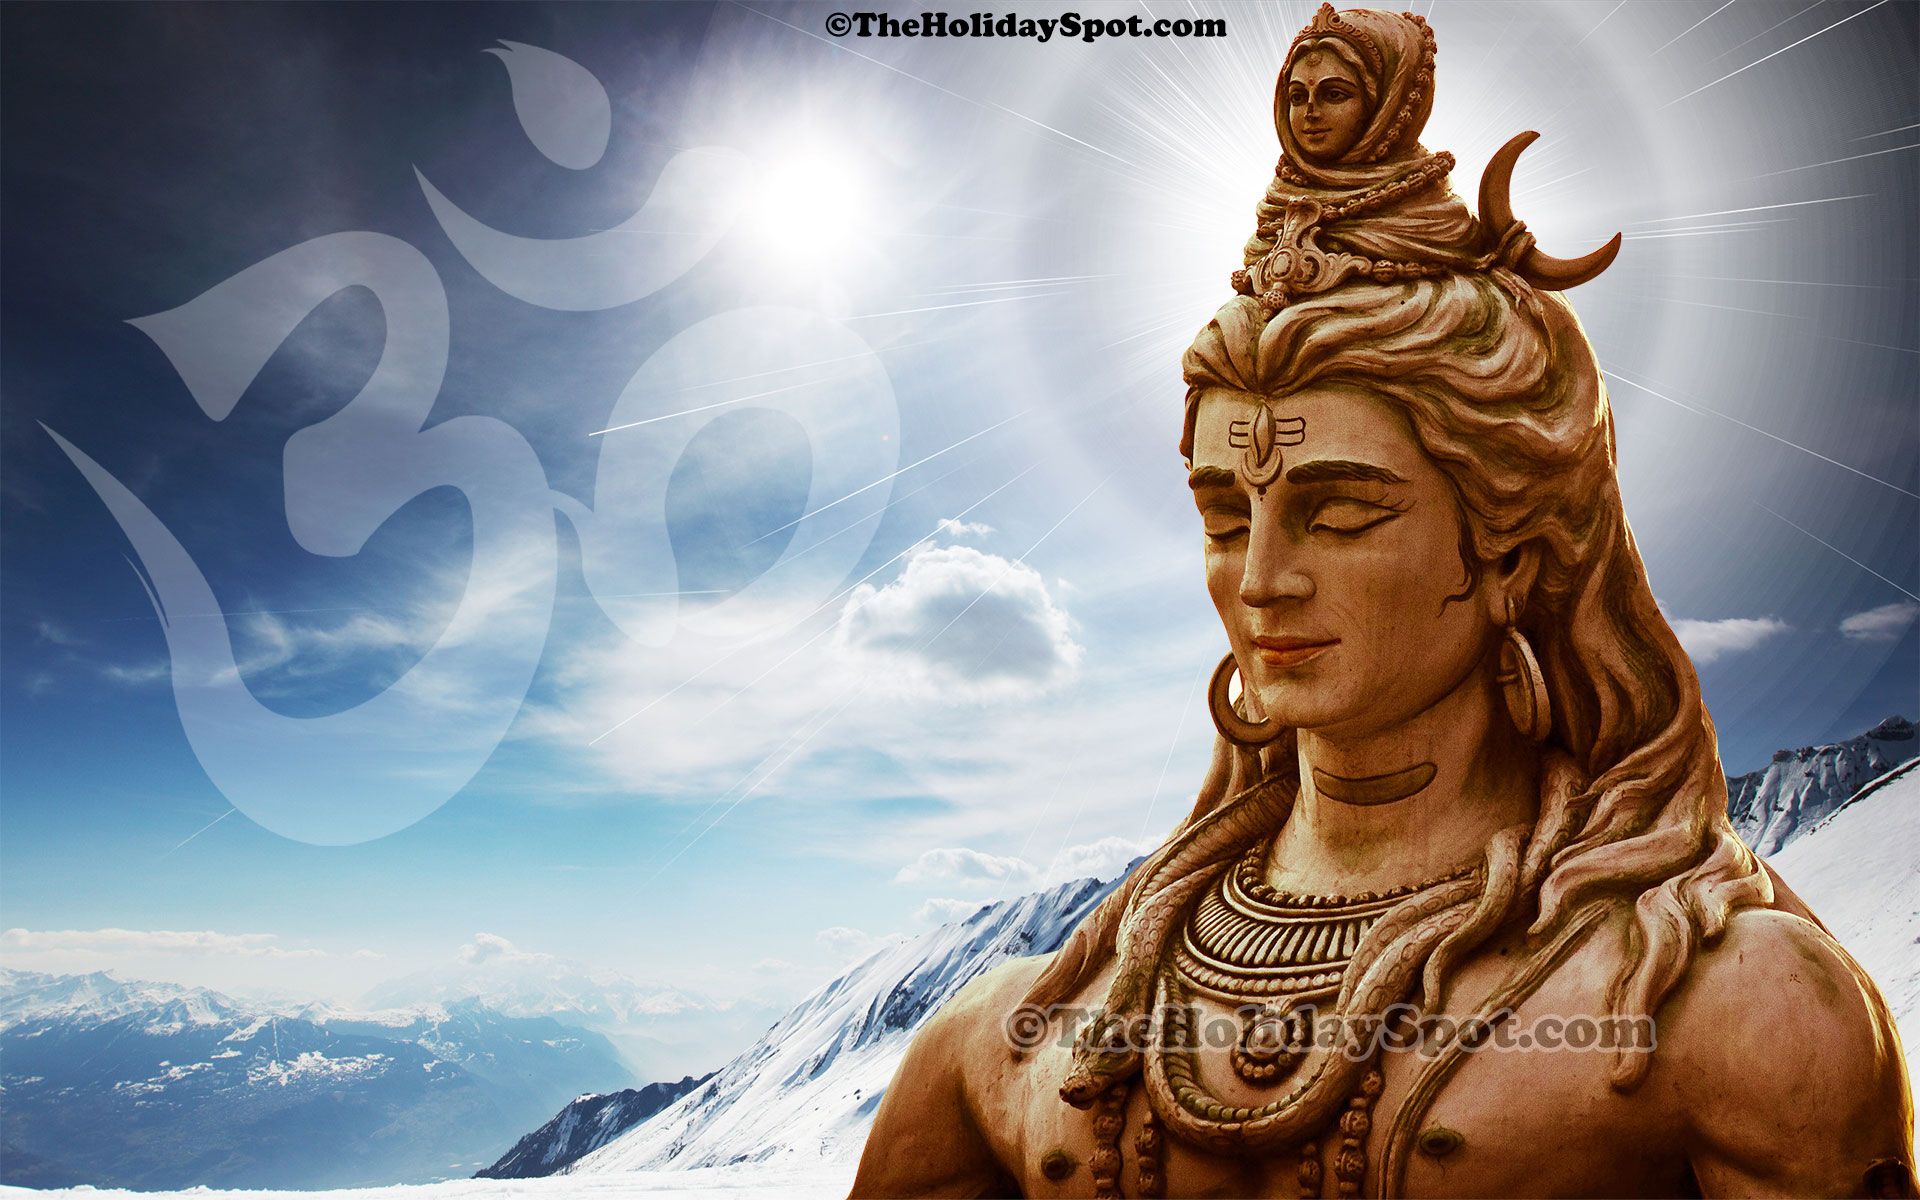 Lord Shiva Hd Wallpapers For Laptop Of lord shiva Lord shiva hd